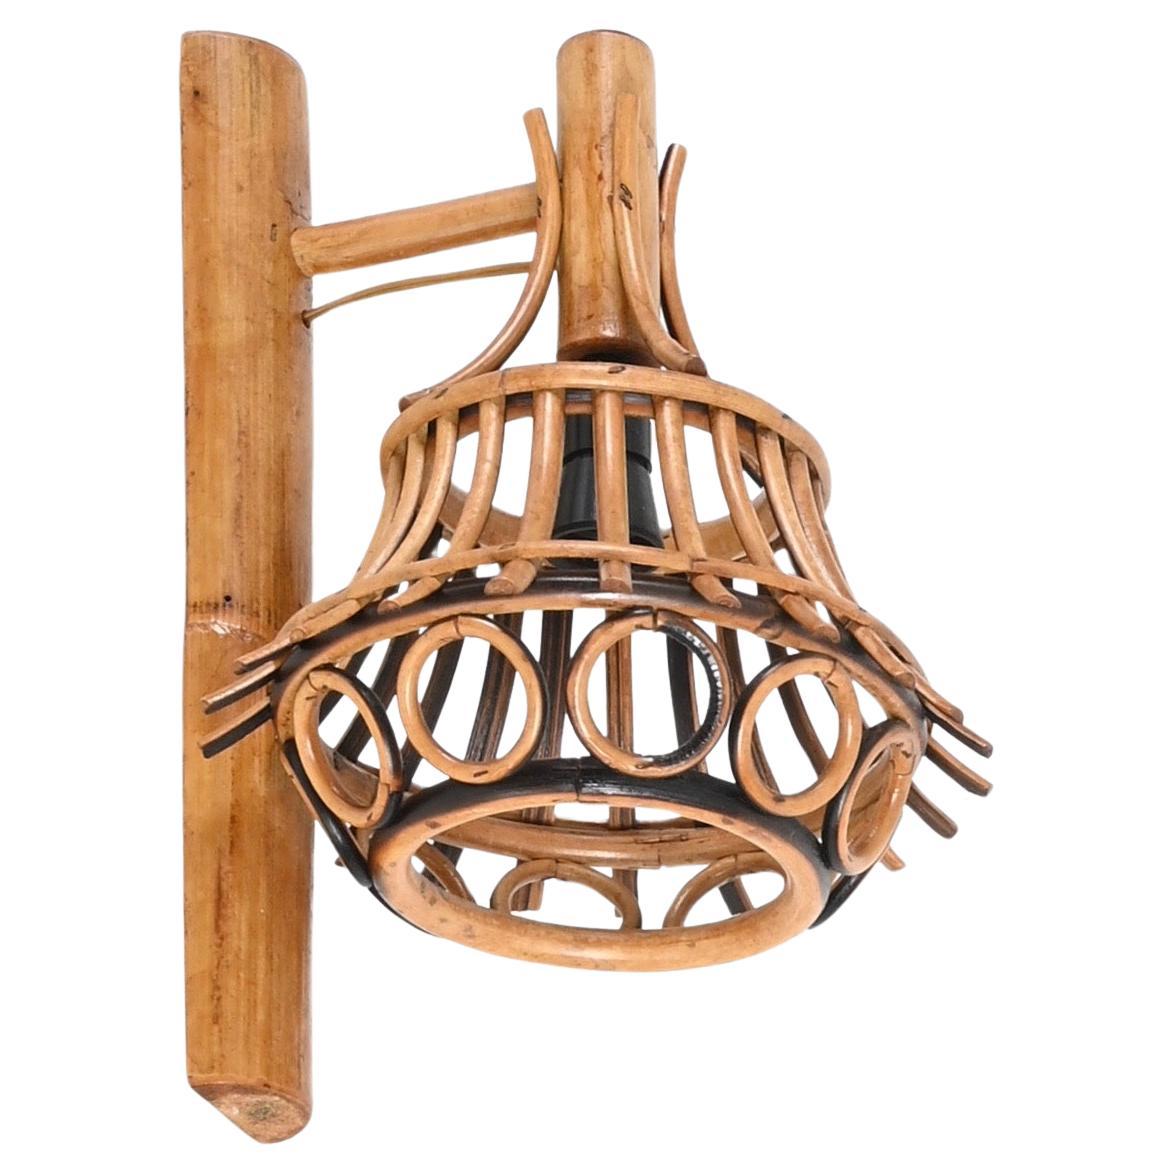 Midcentury Rattan and Bamboo "Lantern" Sconce, Louis Sognot, France, 1960s For Sale